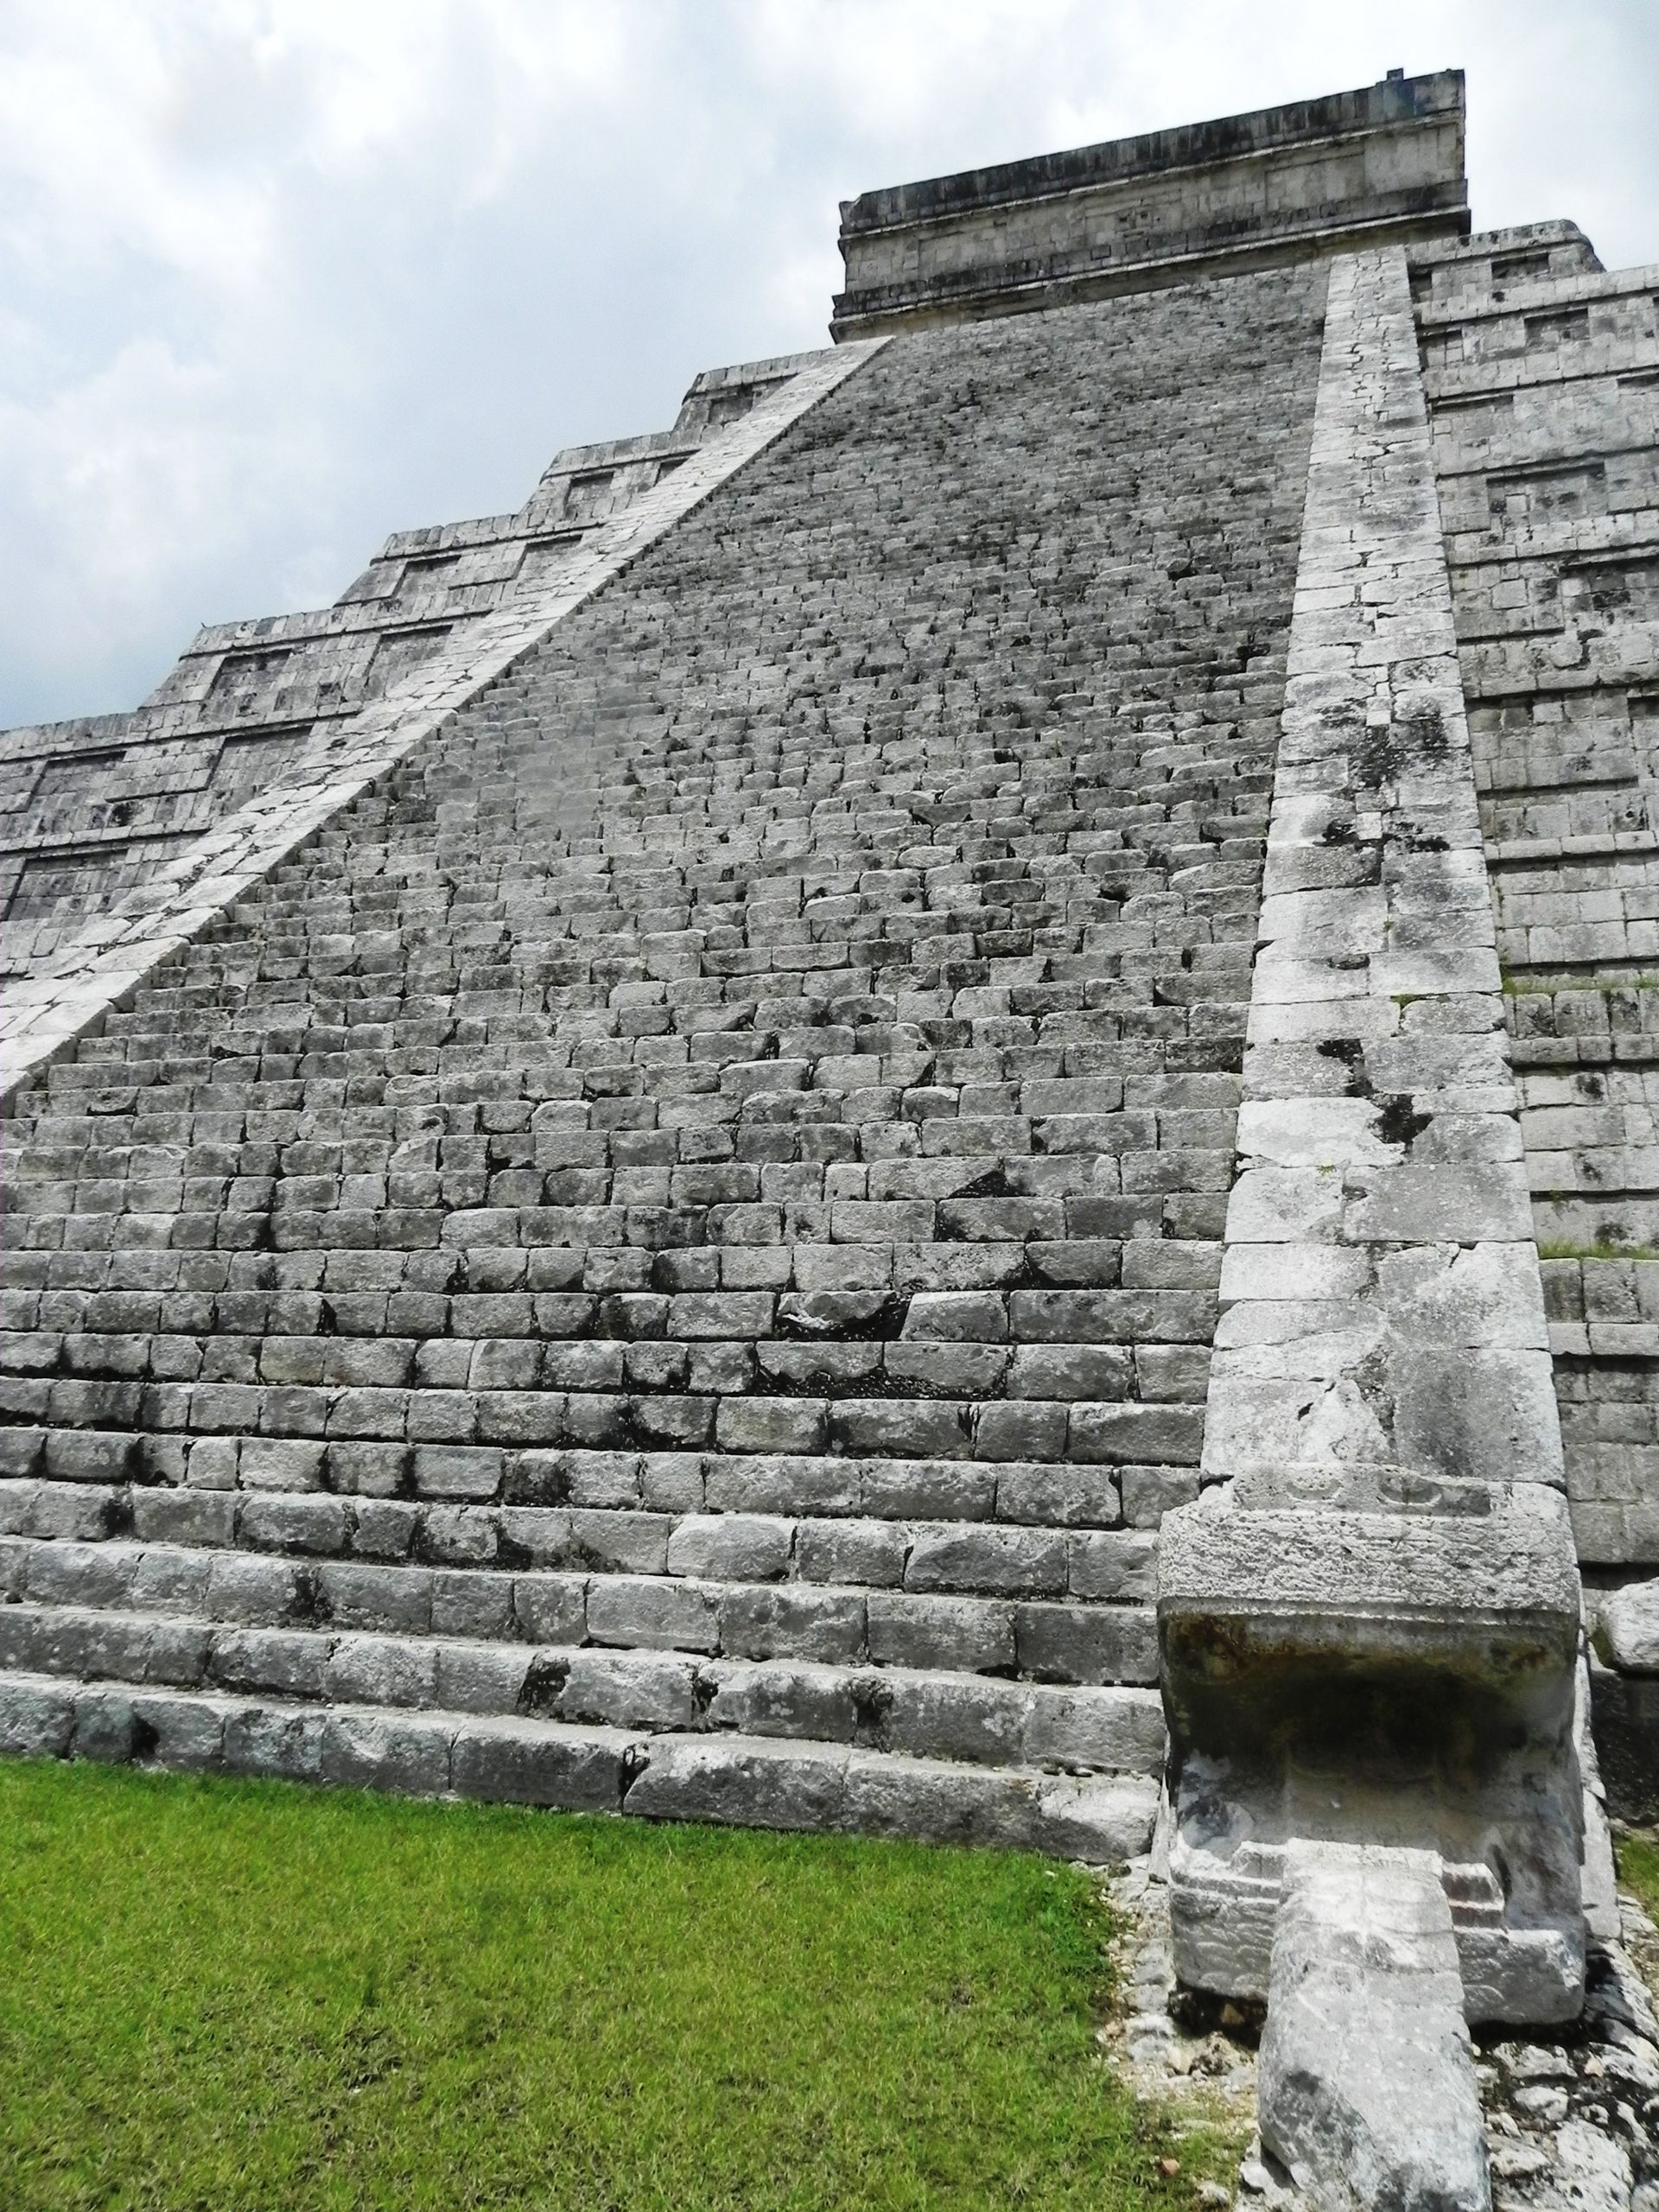 A large stone pyramid in the ancient Mayan city of Chichen Itza.